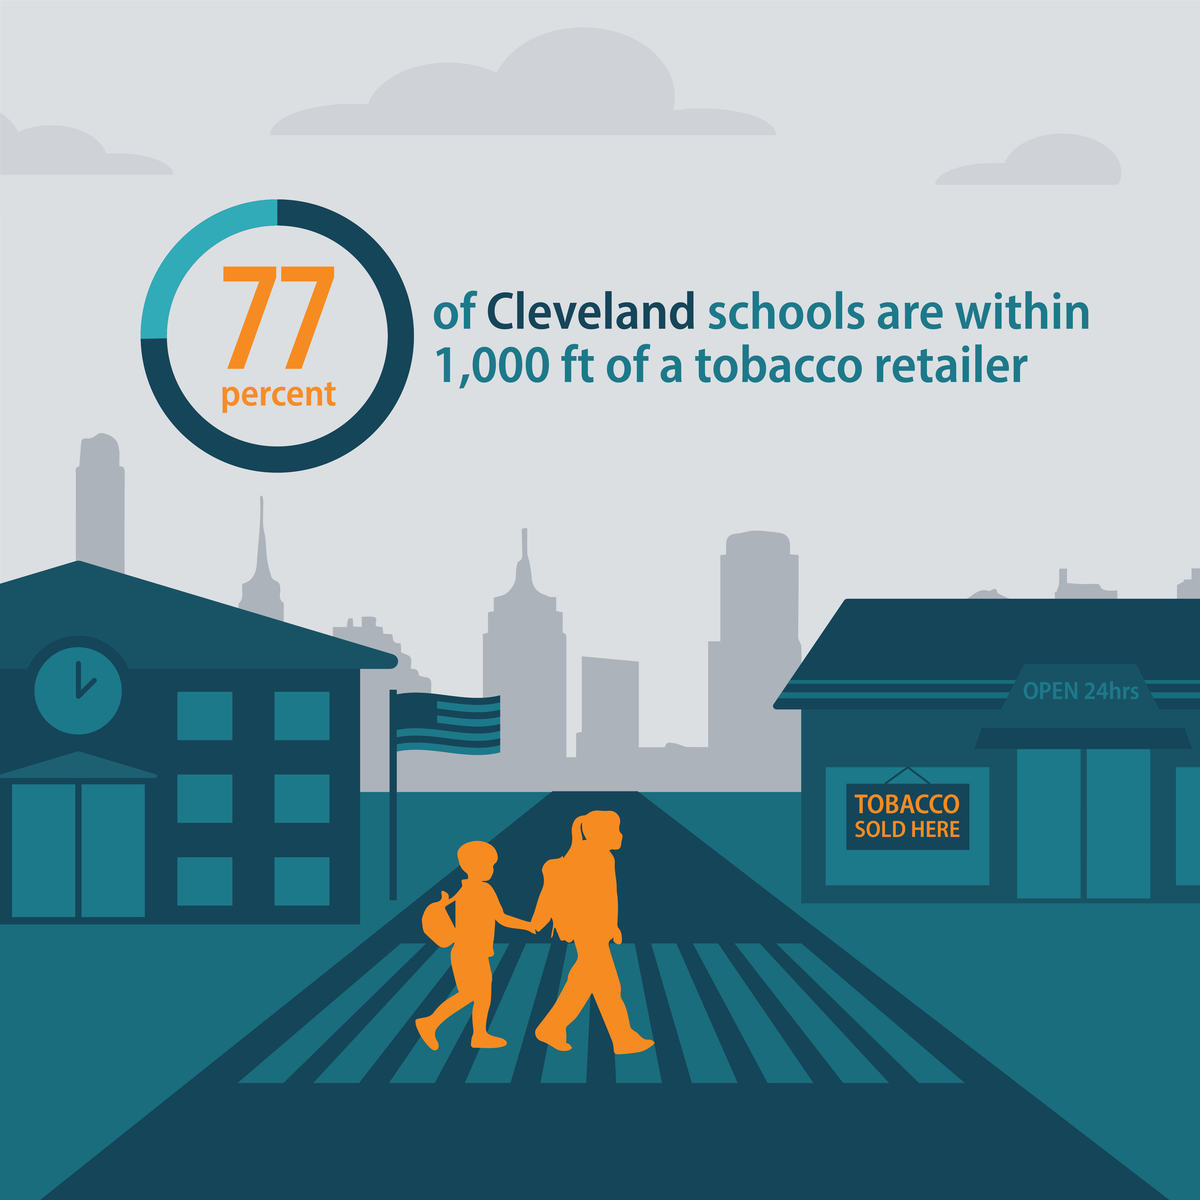 77 percent of Cleveland schools are within 1,000 feet of a tobacco retailer